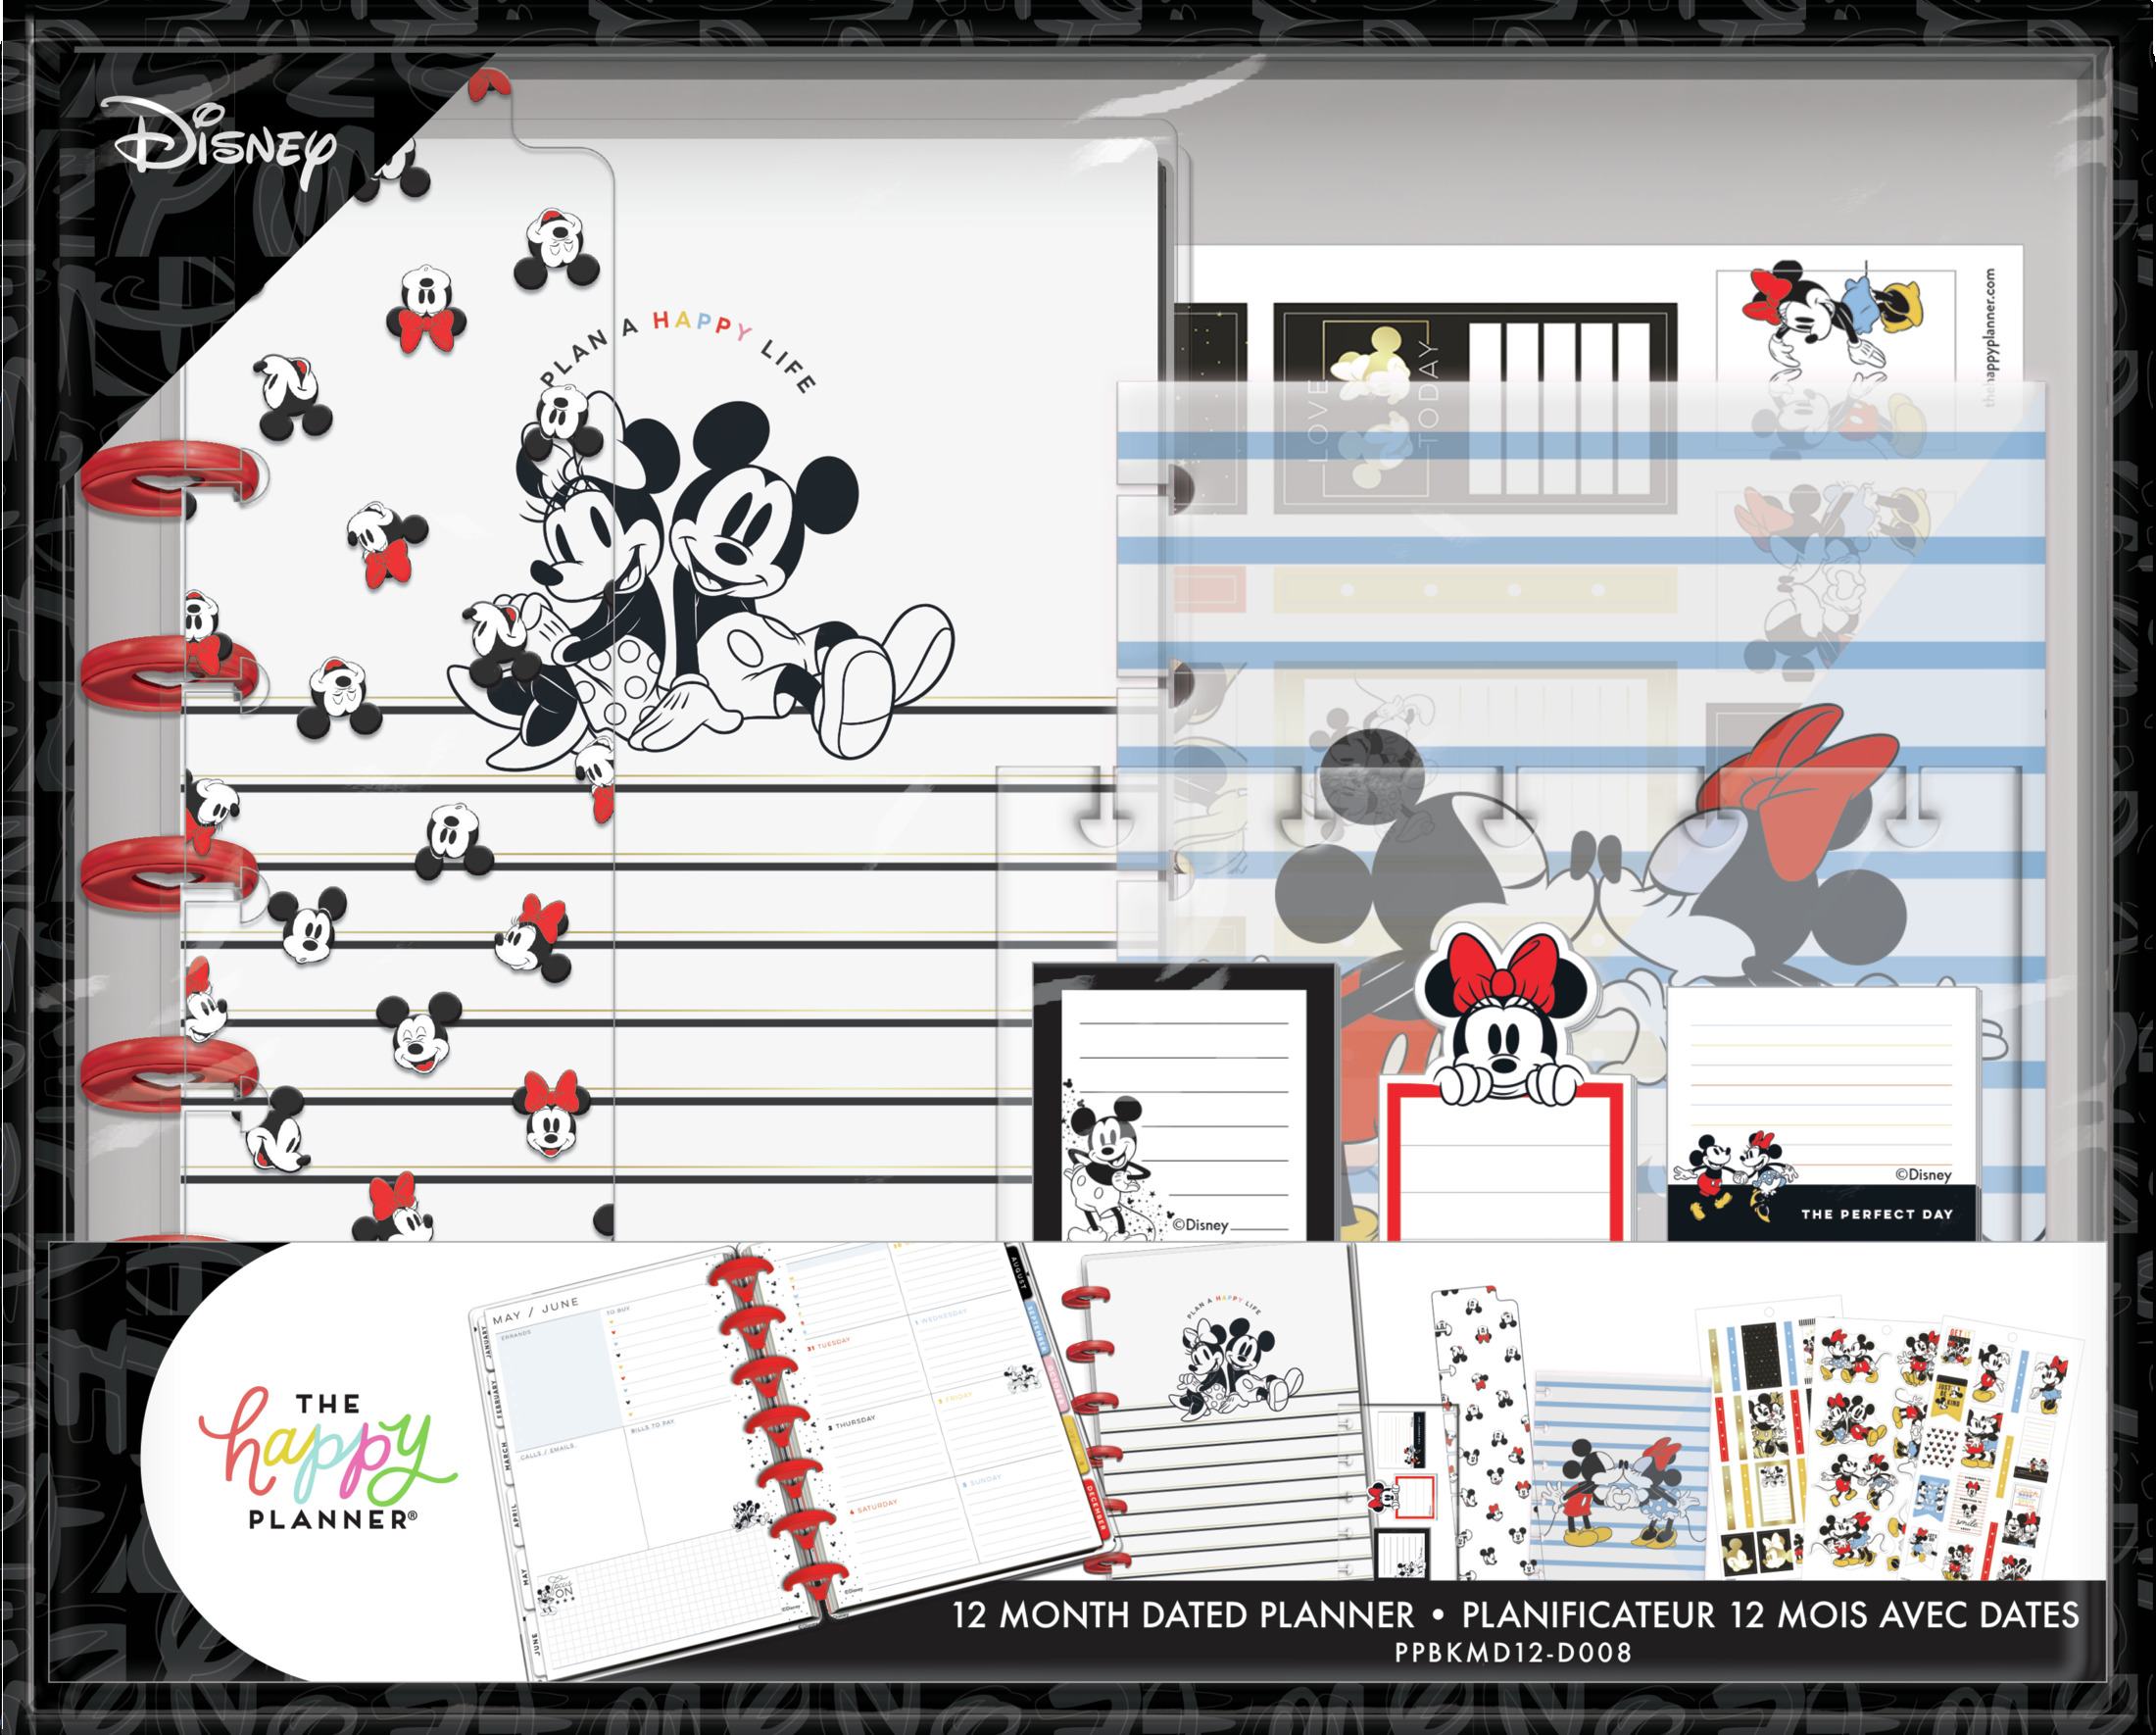 The Happy Planner, Disney, Mickey Mouse & Minnie Mouse Mini Planner Box Kit, 2022, 10" x 1.25" x 8" - image 1 of 11